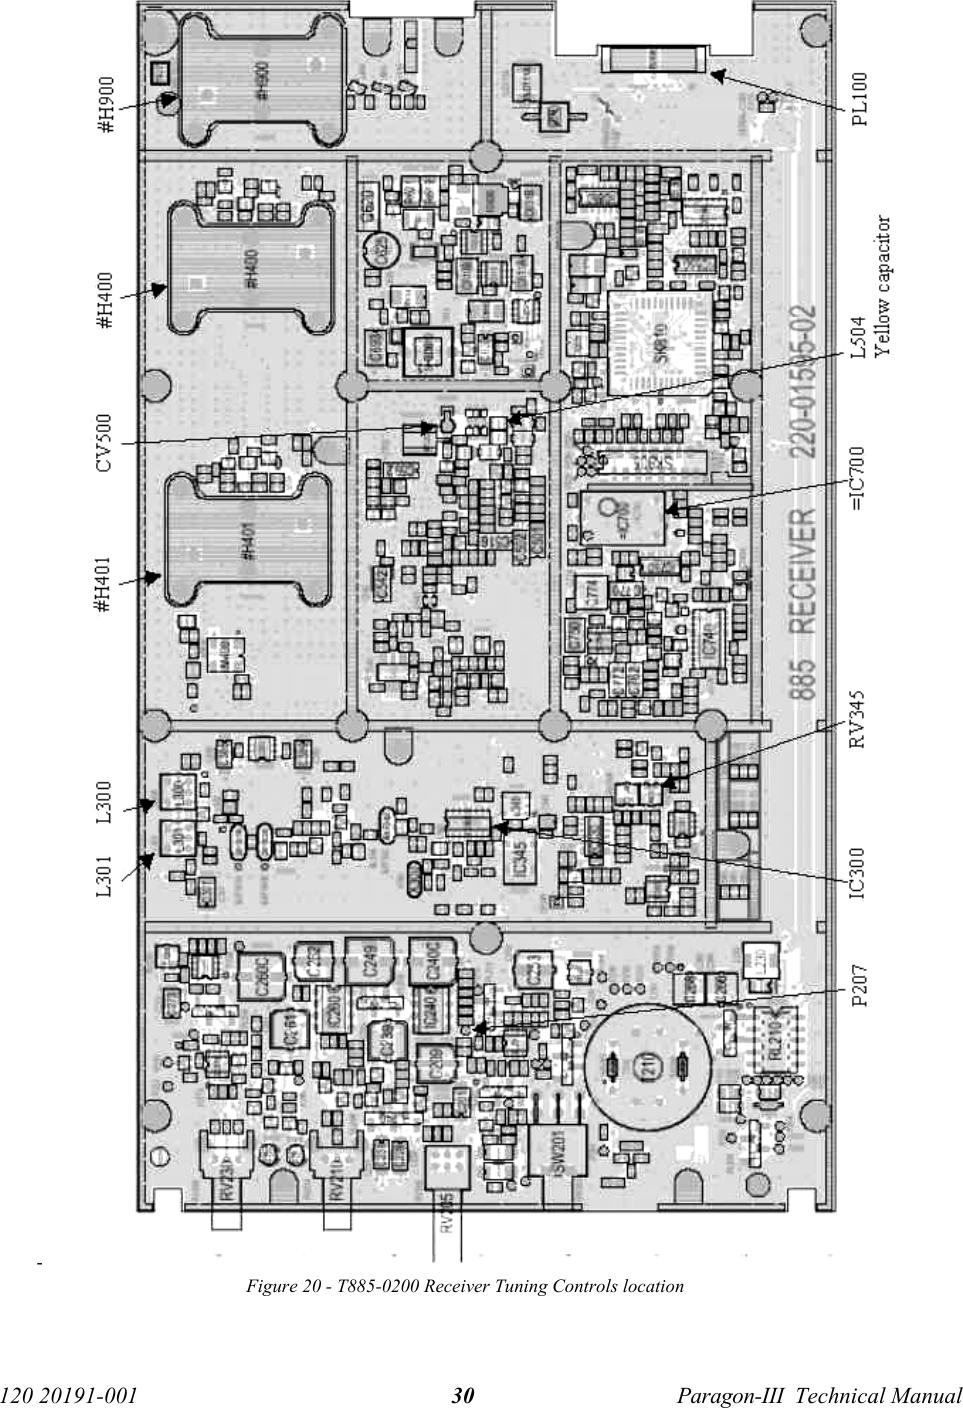   120 20191-001  Paragon-III  Technical Manual 30-    Figure 20 - T885-0200 Receiver Tuning Controls location 